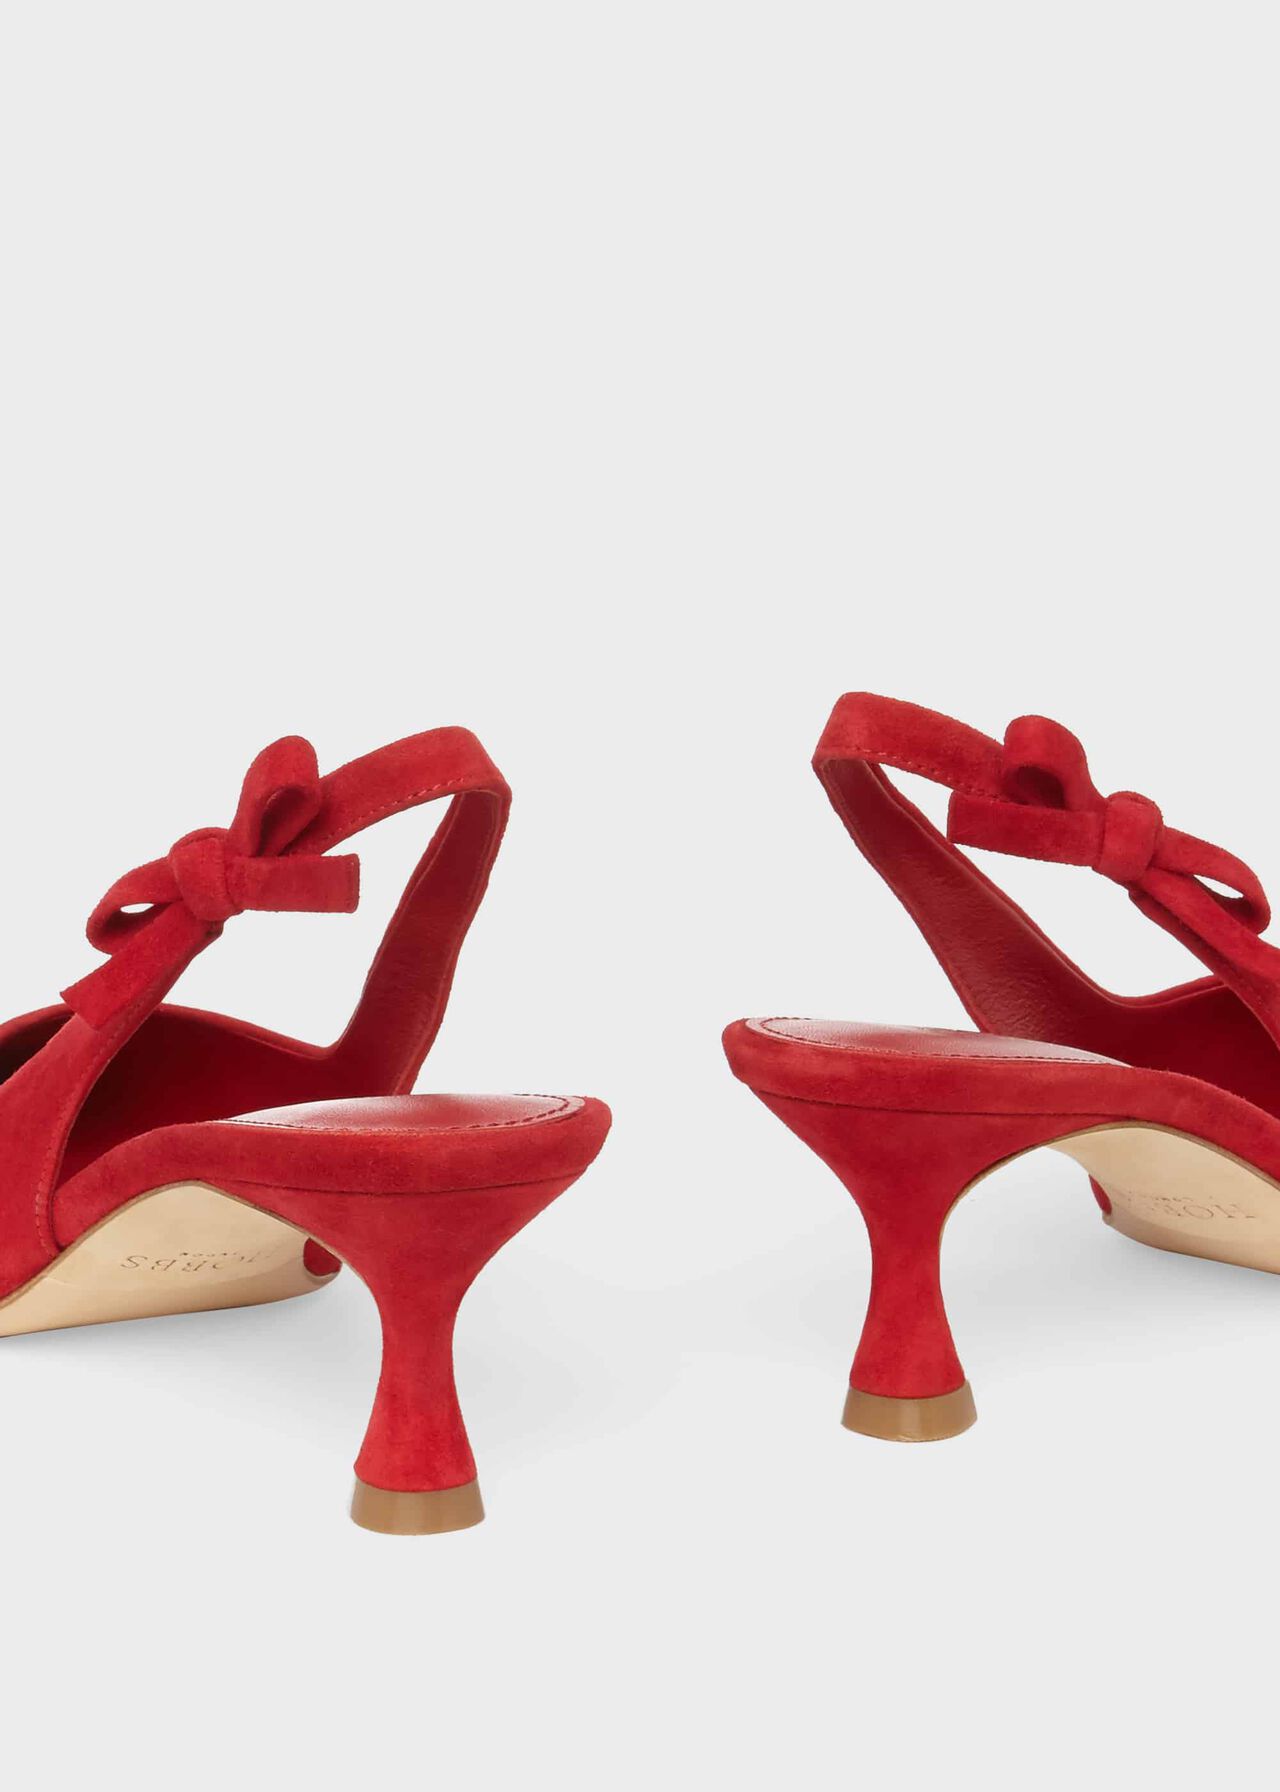 Julia Suede Slingback Shoes, Poppy Red, hi-res